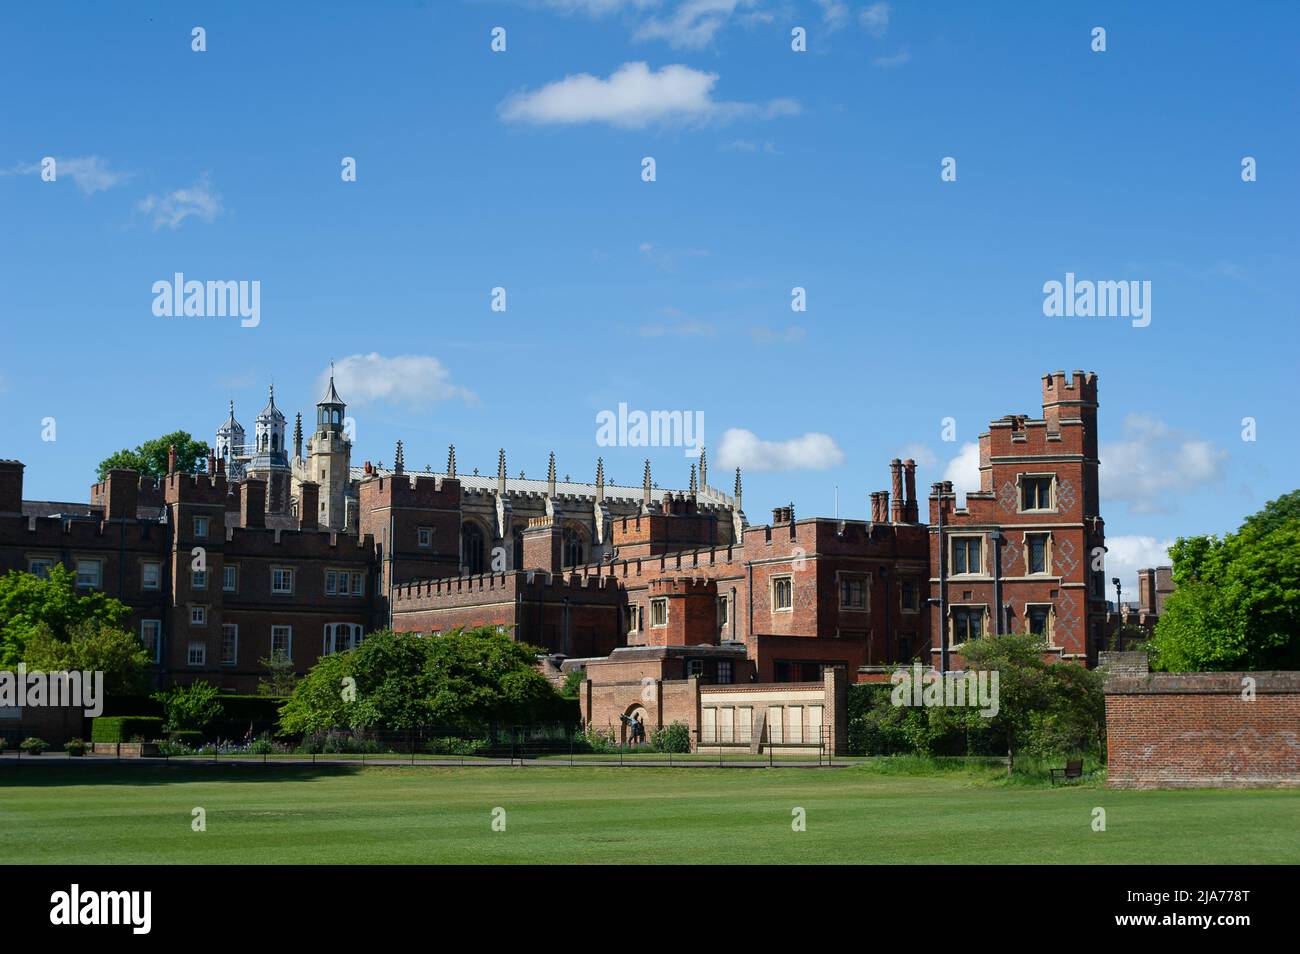 Eton, Windsor, Berkshire, UK. 28th May, 2022. The Eton College Boys are now on long leave for the May bank holiday. Former pupils at the famous public school include The Duke of Cambridge, The Duke of Sussex, David Cameron and current Prime Minister Boris Johnson. Credit: Maureen McLean/Alamy Stock Photo